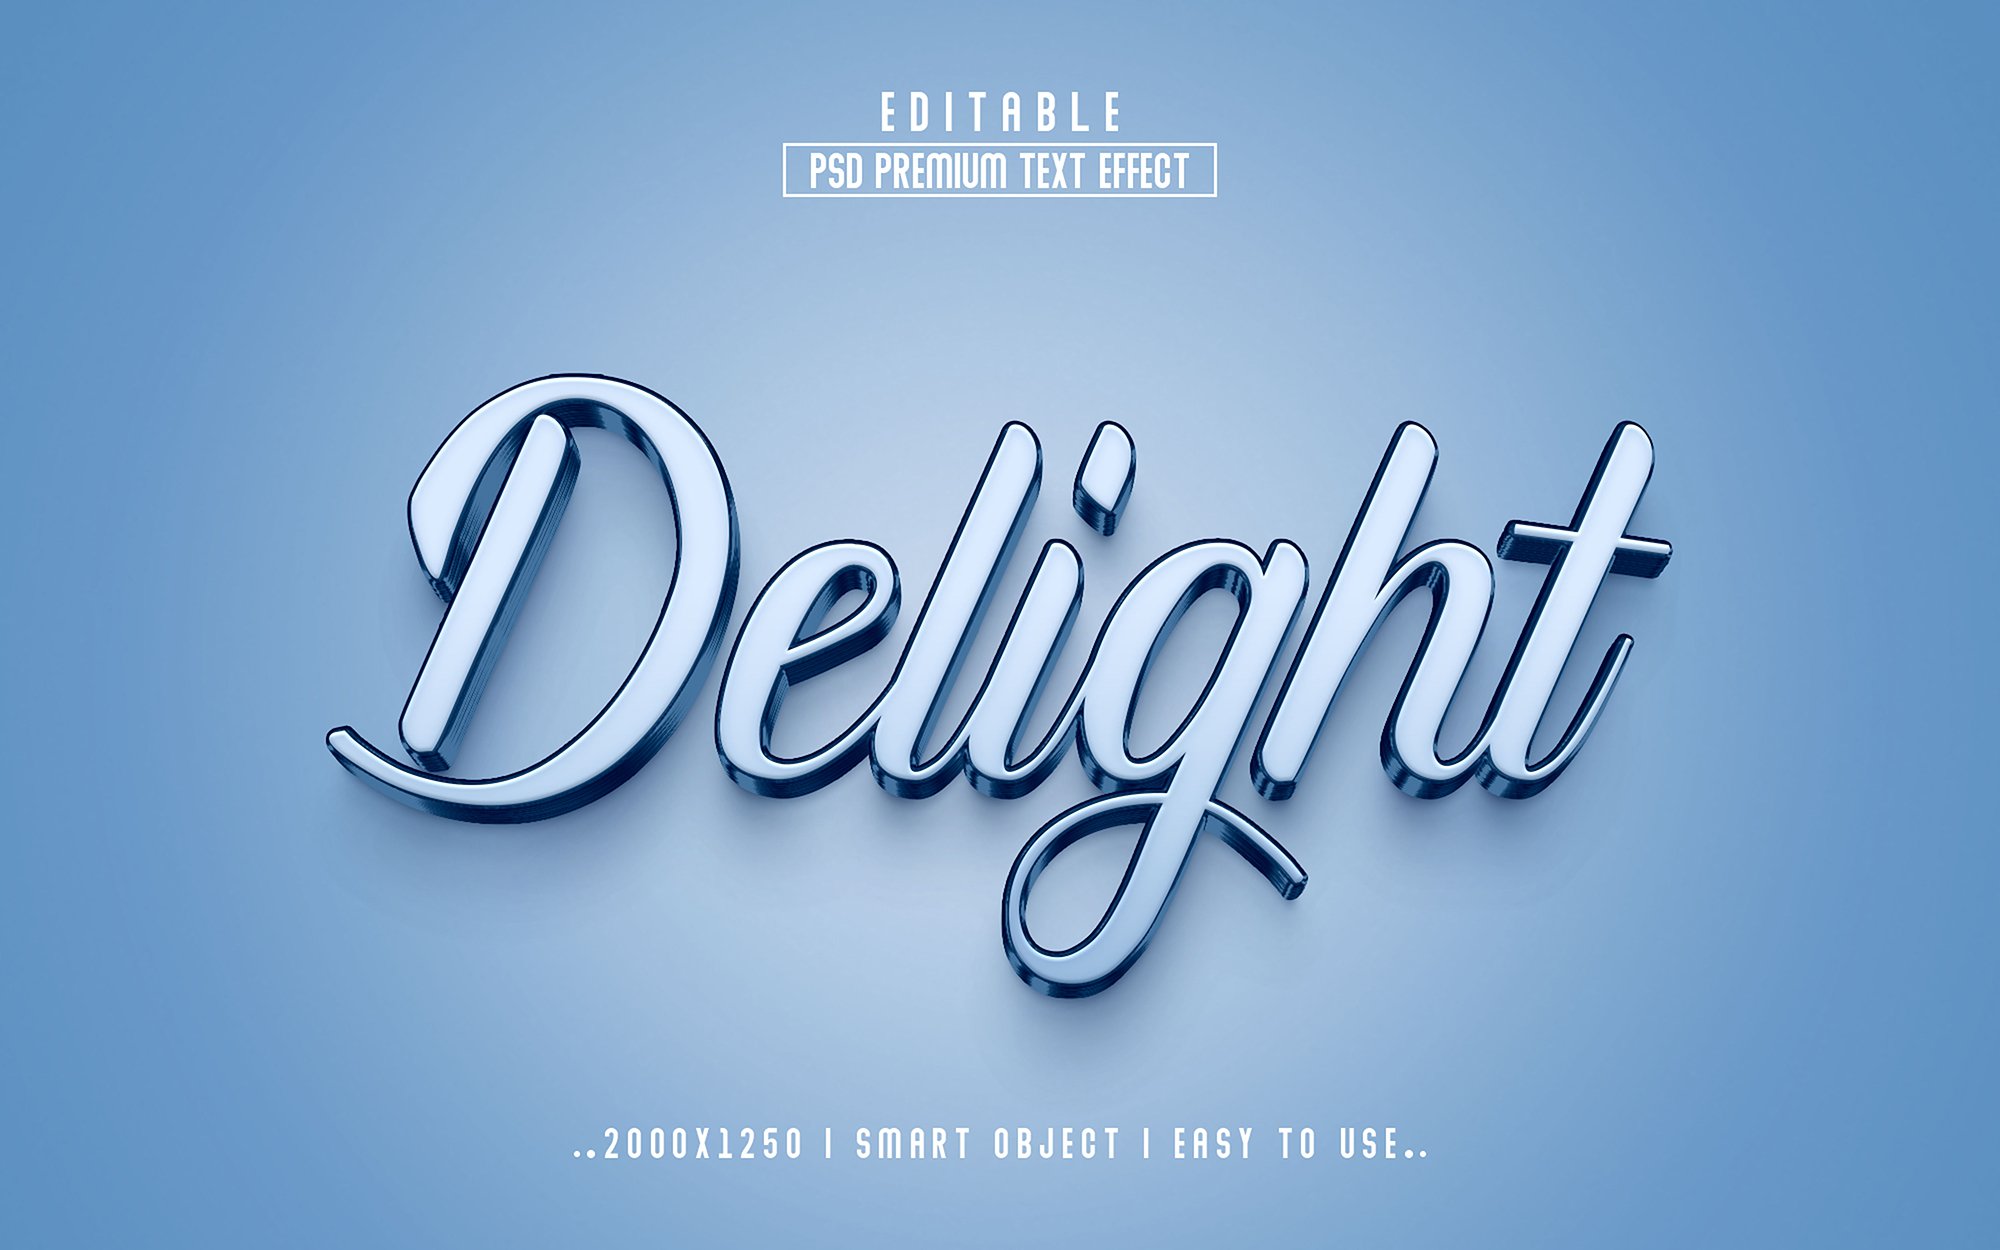 Delight 3D Editable psd Text Effectcover image.